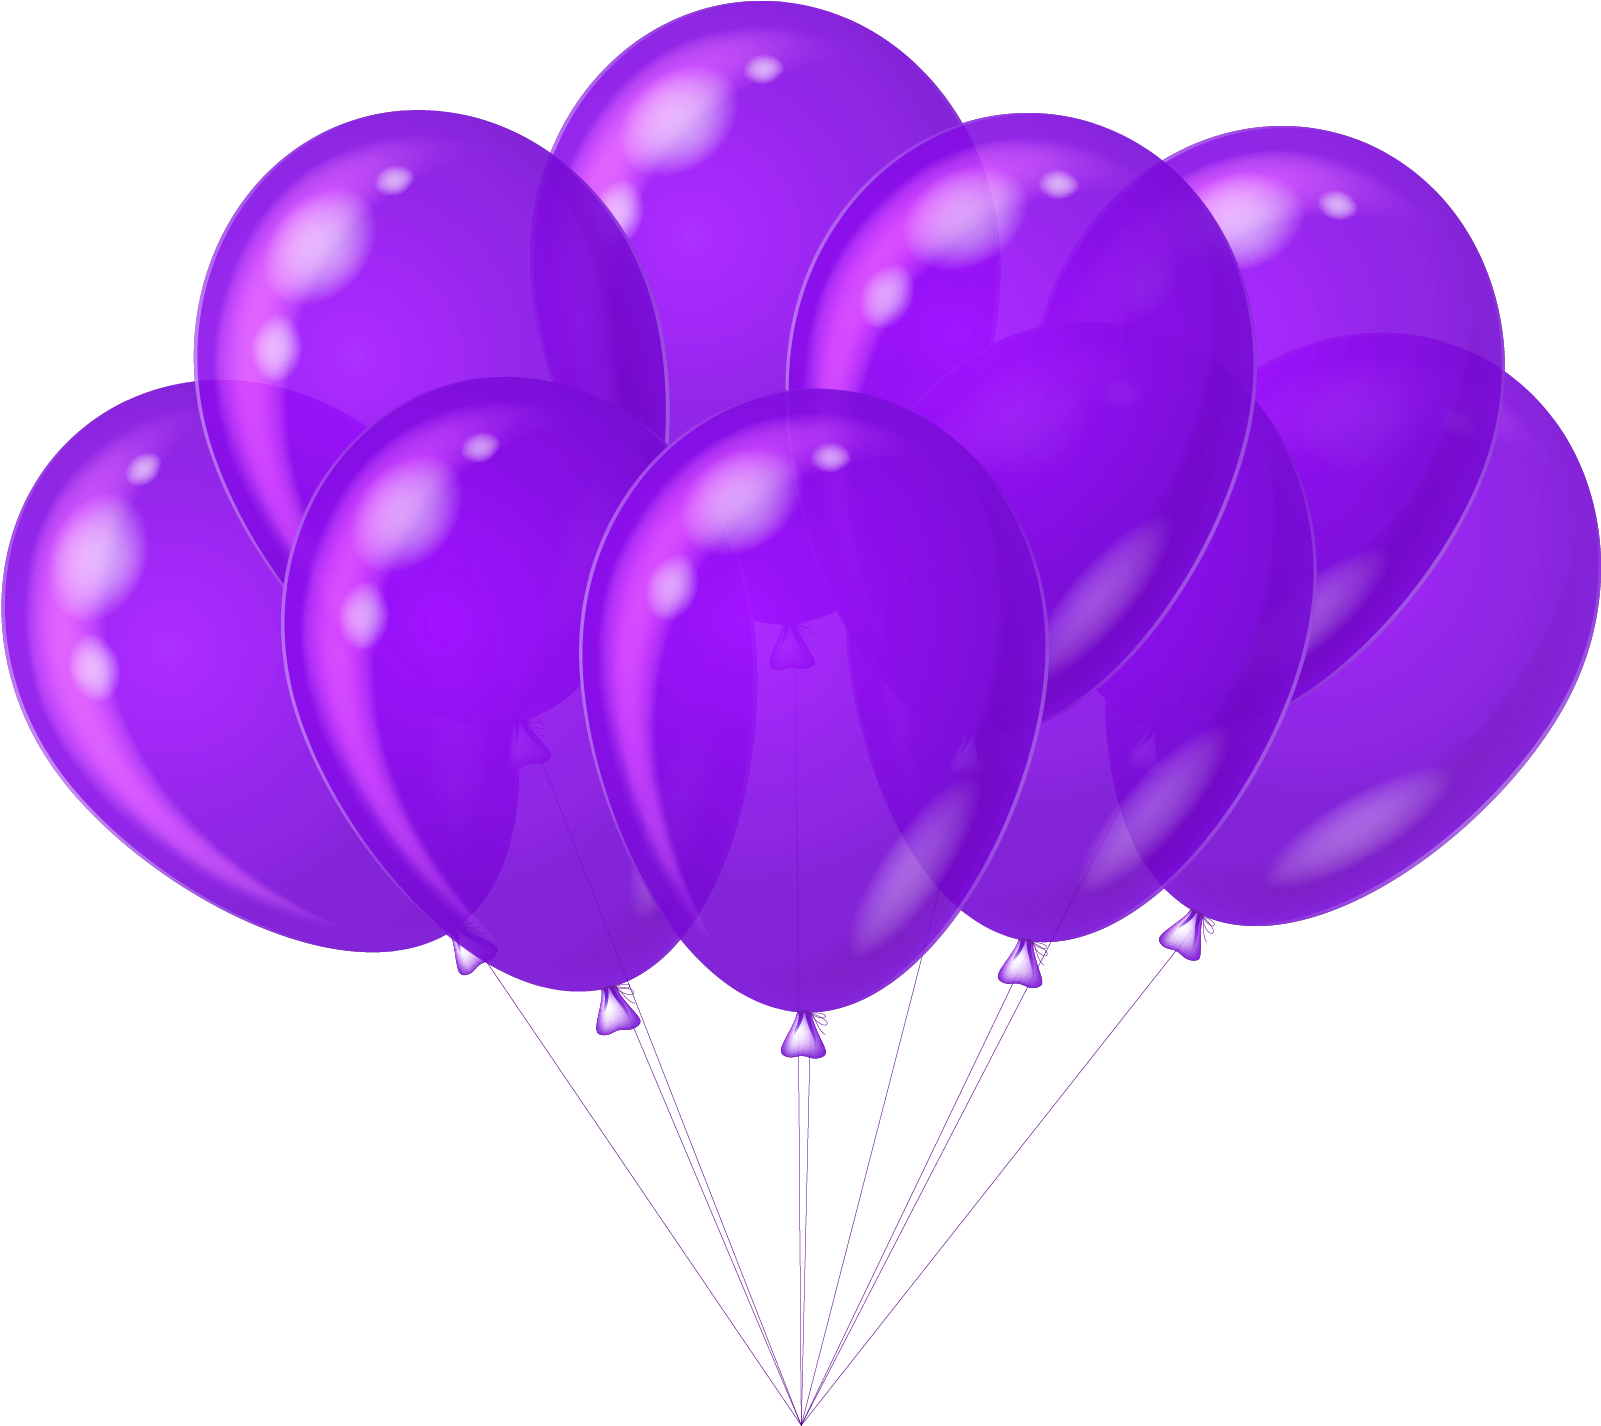 Clusterof Purple Balloons PNG